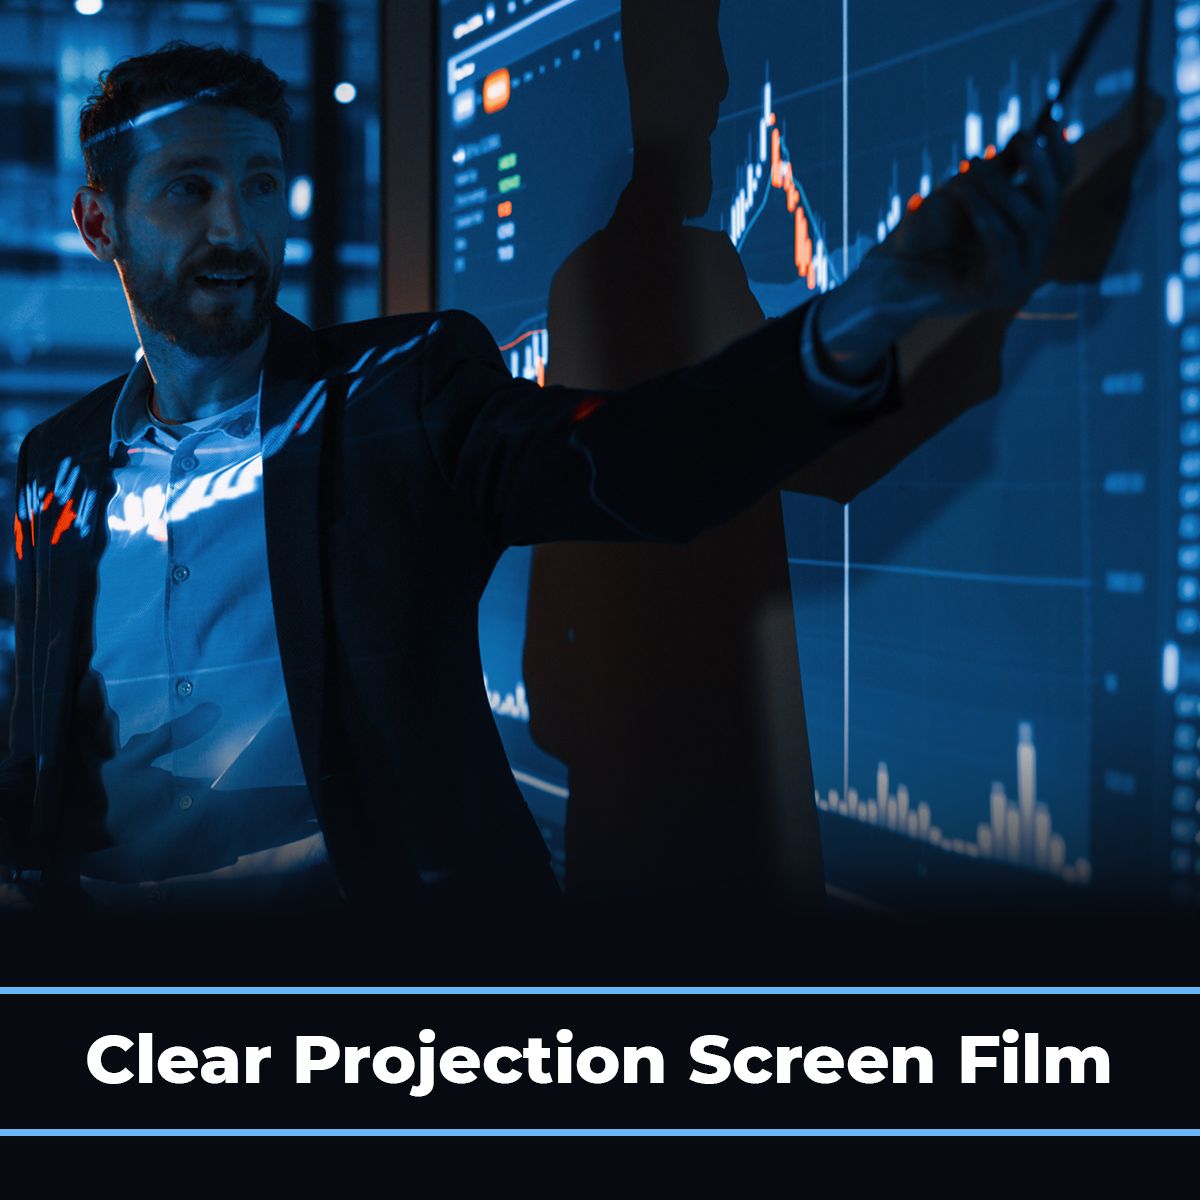 Clear Projection Screen Film